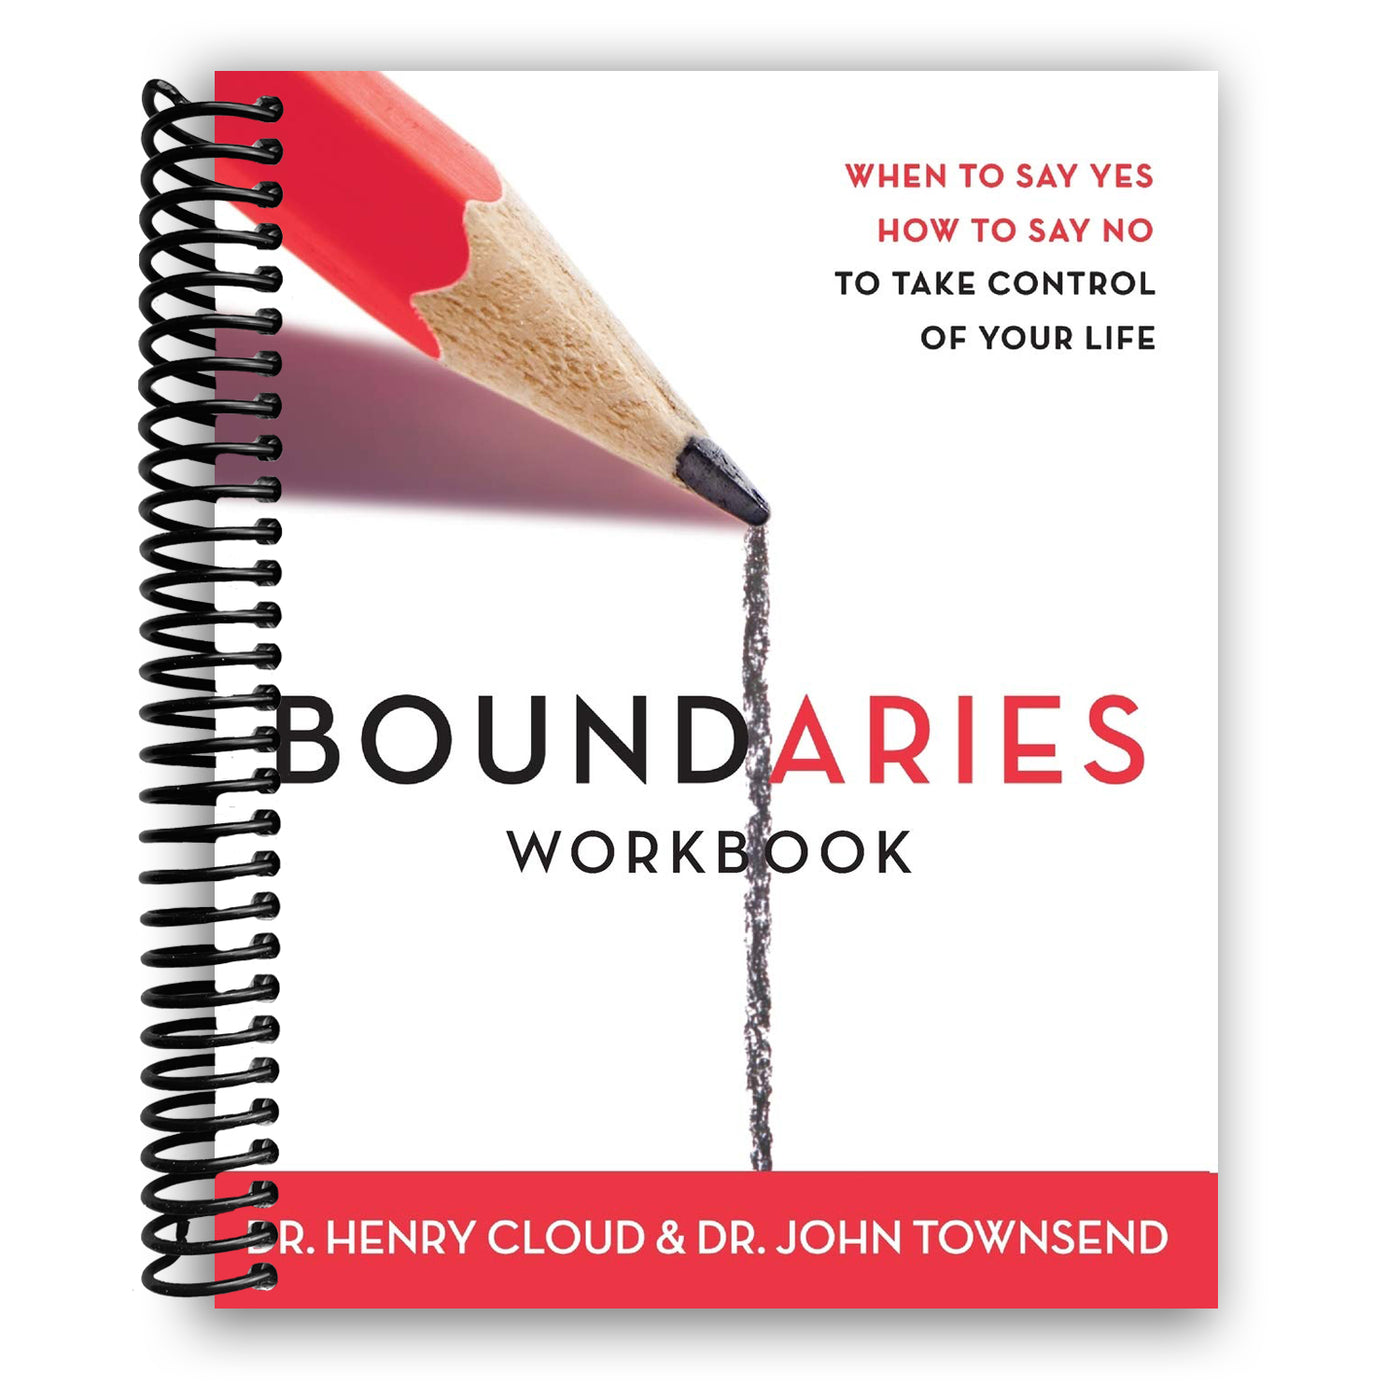 Boundaries Workbook: When to Say Yes, How to Say No to Take Control of Your Life (Spiral Bound)